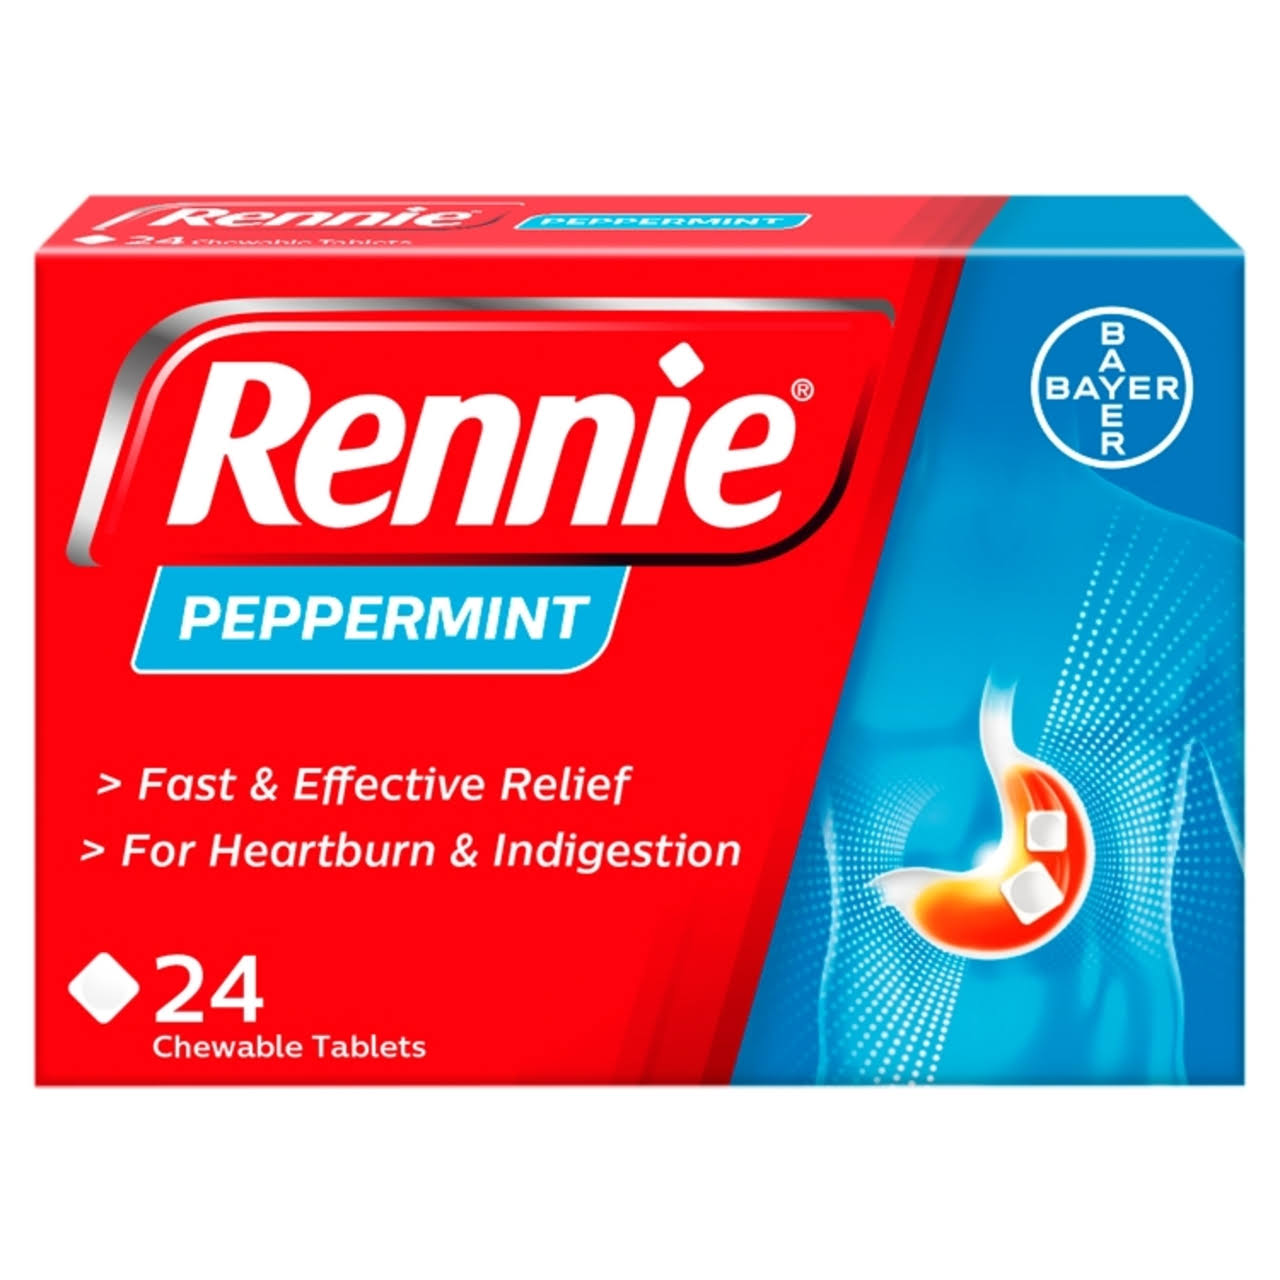 Rennie Indigestion and Heartburn Relief Chewable Tablets - Peppermint, 24 Tablets